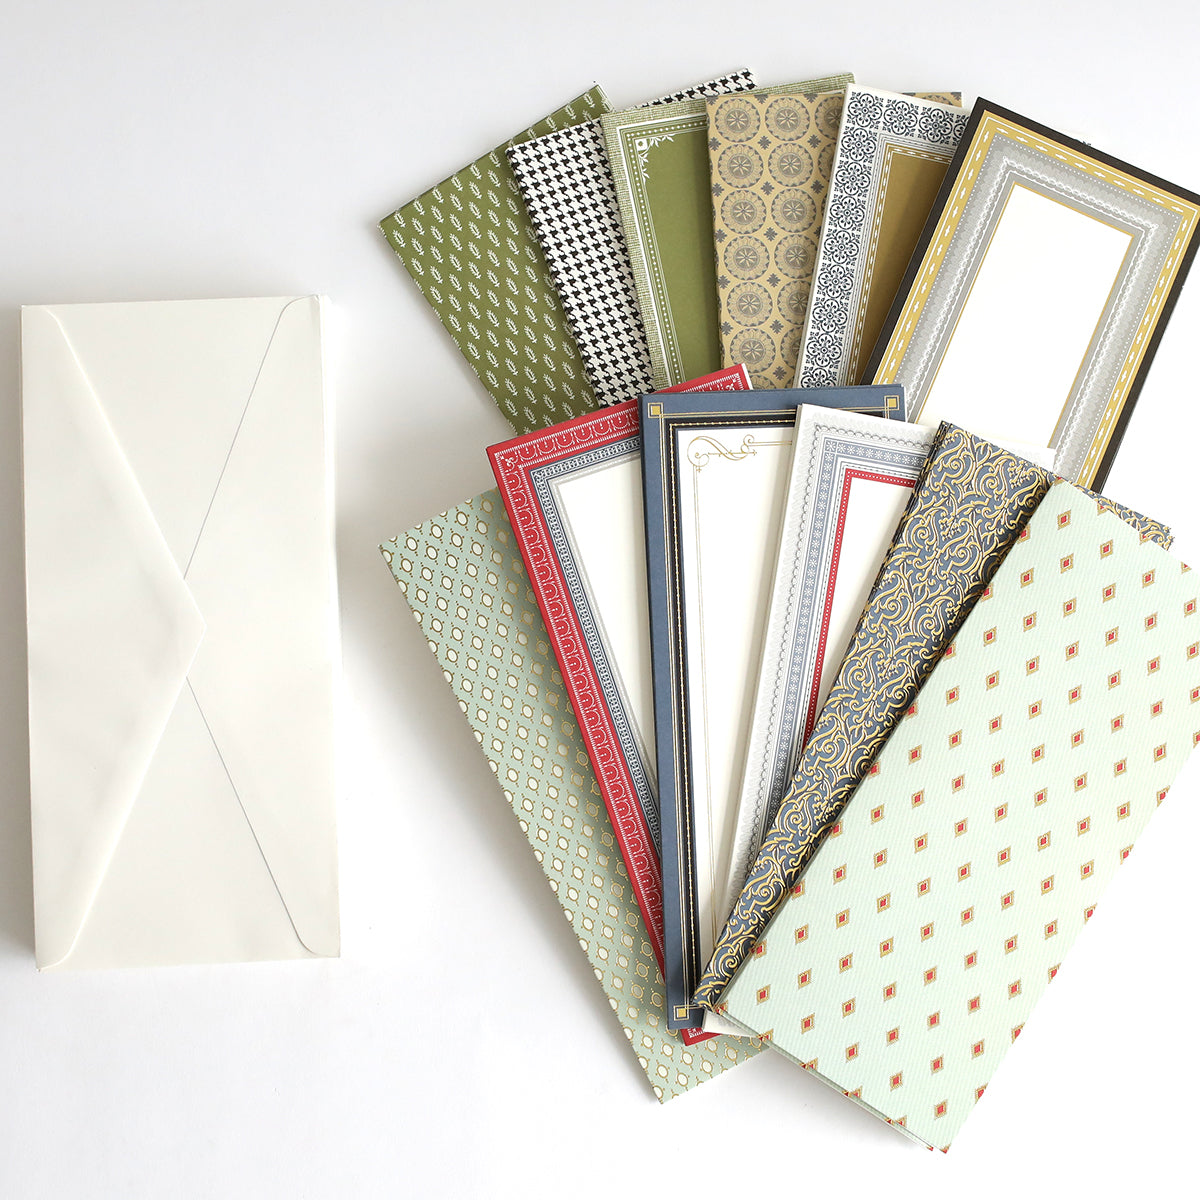 A collection of Beaux Regards Slimline Cards and Envelopes on a white surface.